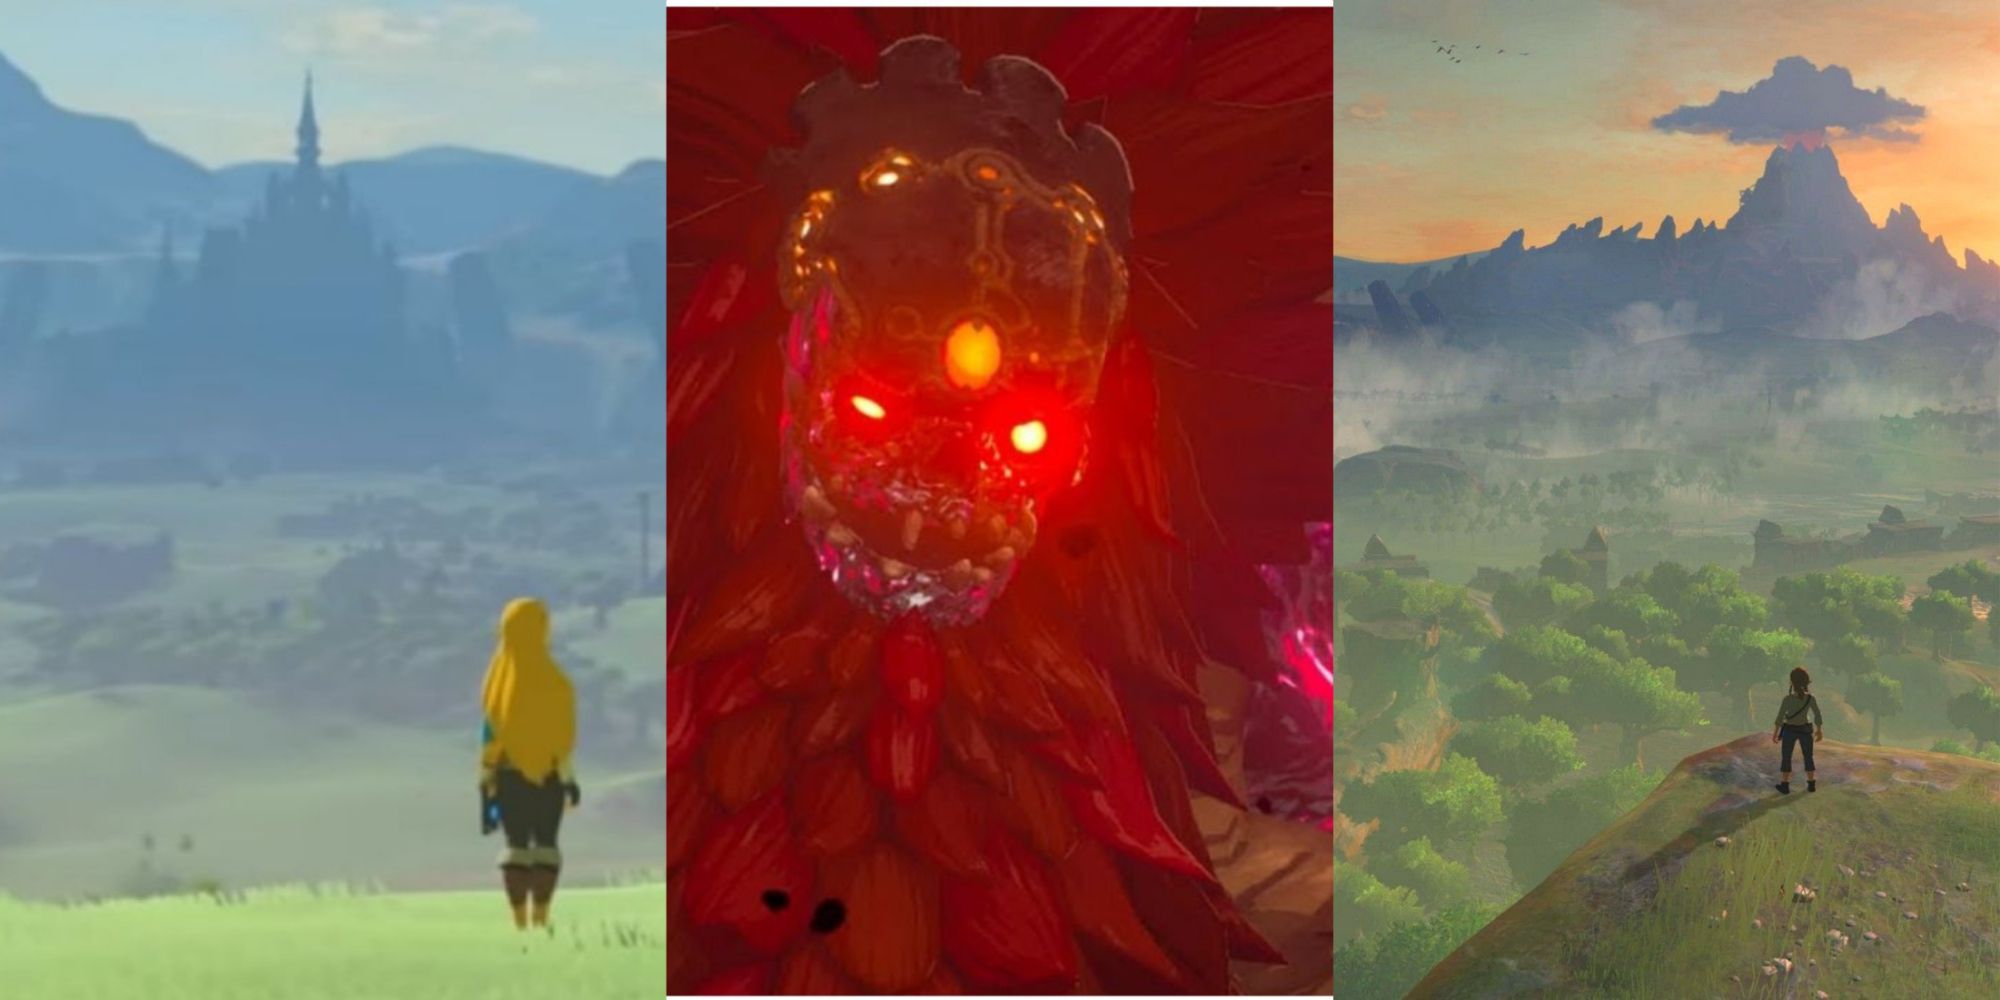 Zelda stood overlooking Hyrule Castle, Calamity Ganon, and Link overlooking the ruined Hyrule Castle, left to right